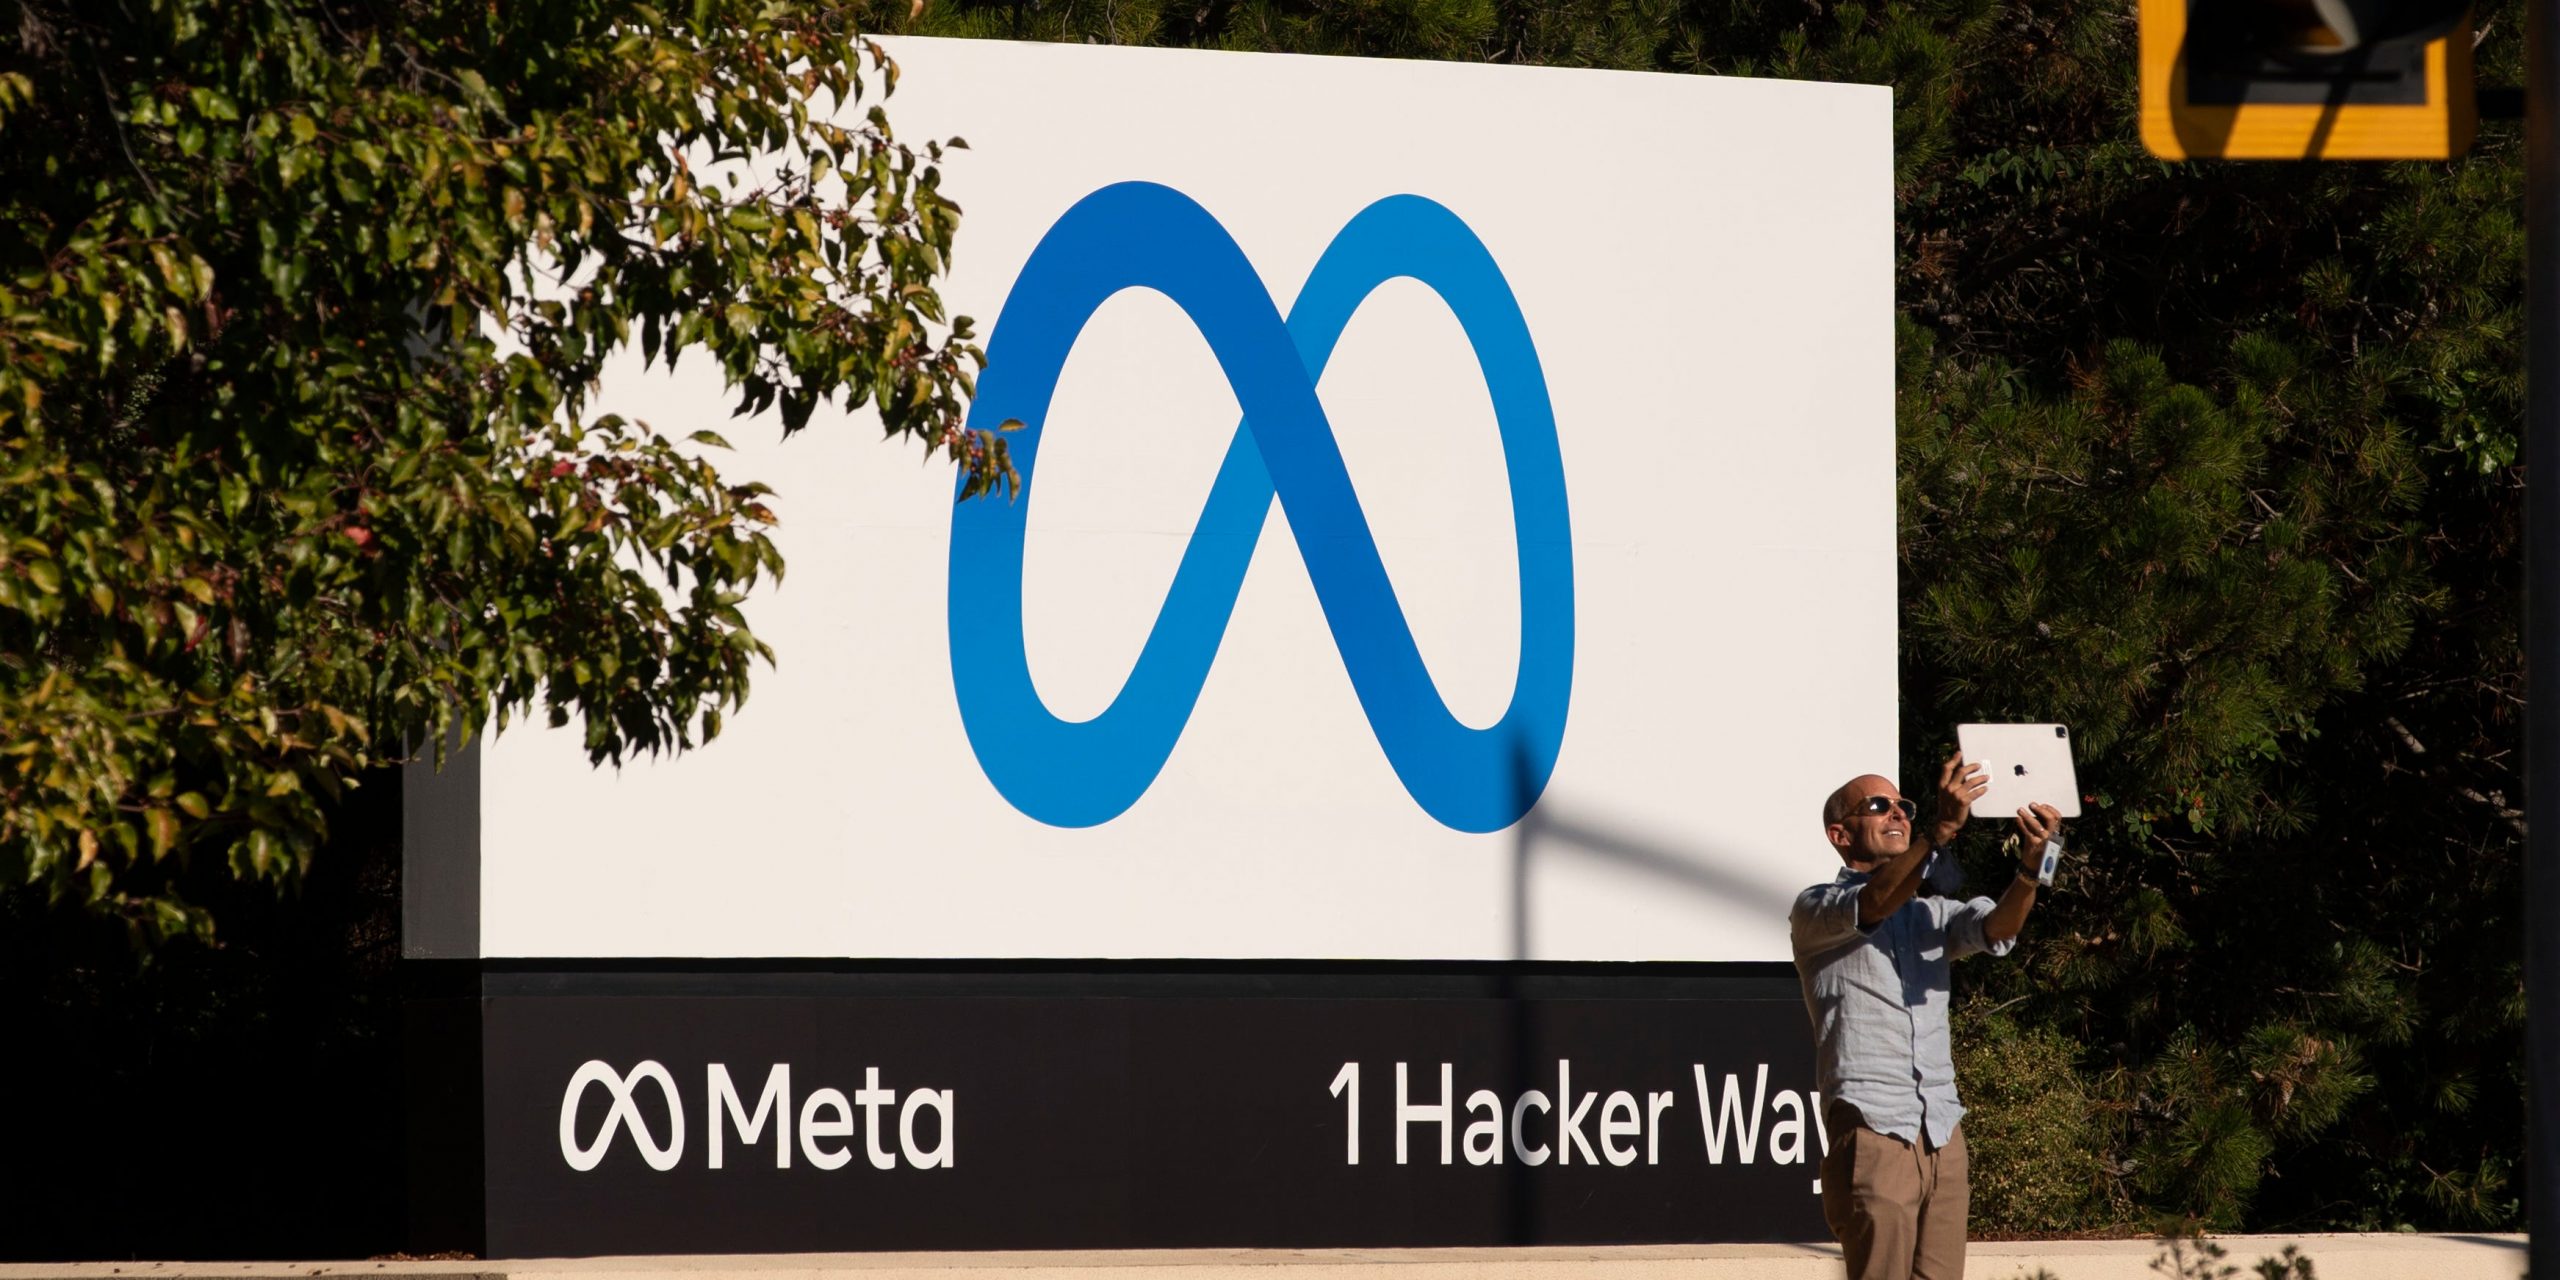 A man takes pictures in front of a sign showing logo of Meta outside Facebook headquarters on October 28, 2021 in Menlo Park, California.